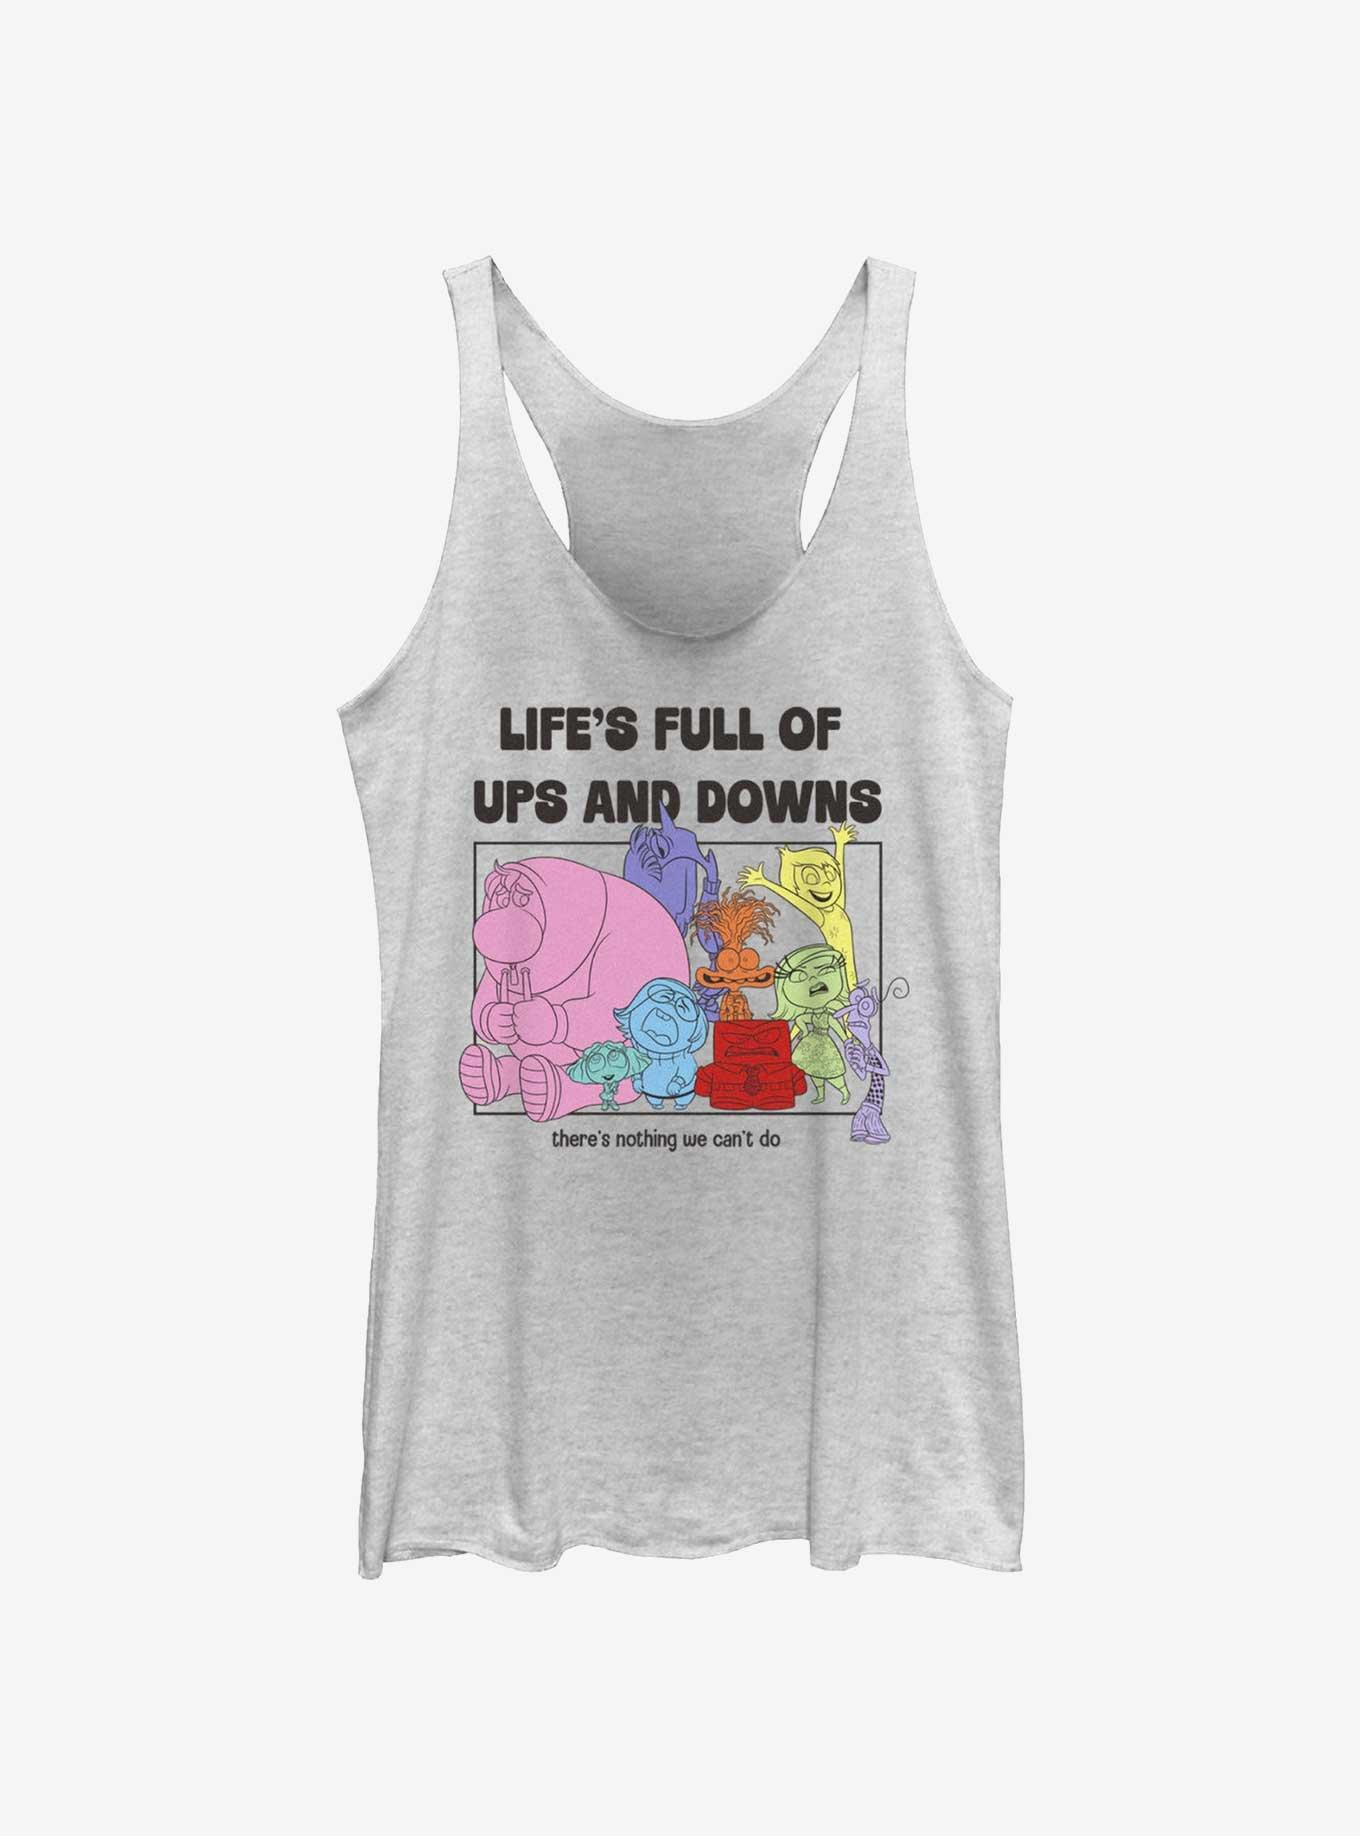 Disney Pixar Inside Out 2 Life's Full Of Ups And Downs Womens Tank Top, , hi-res